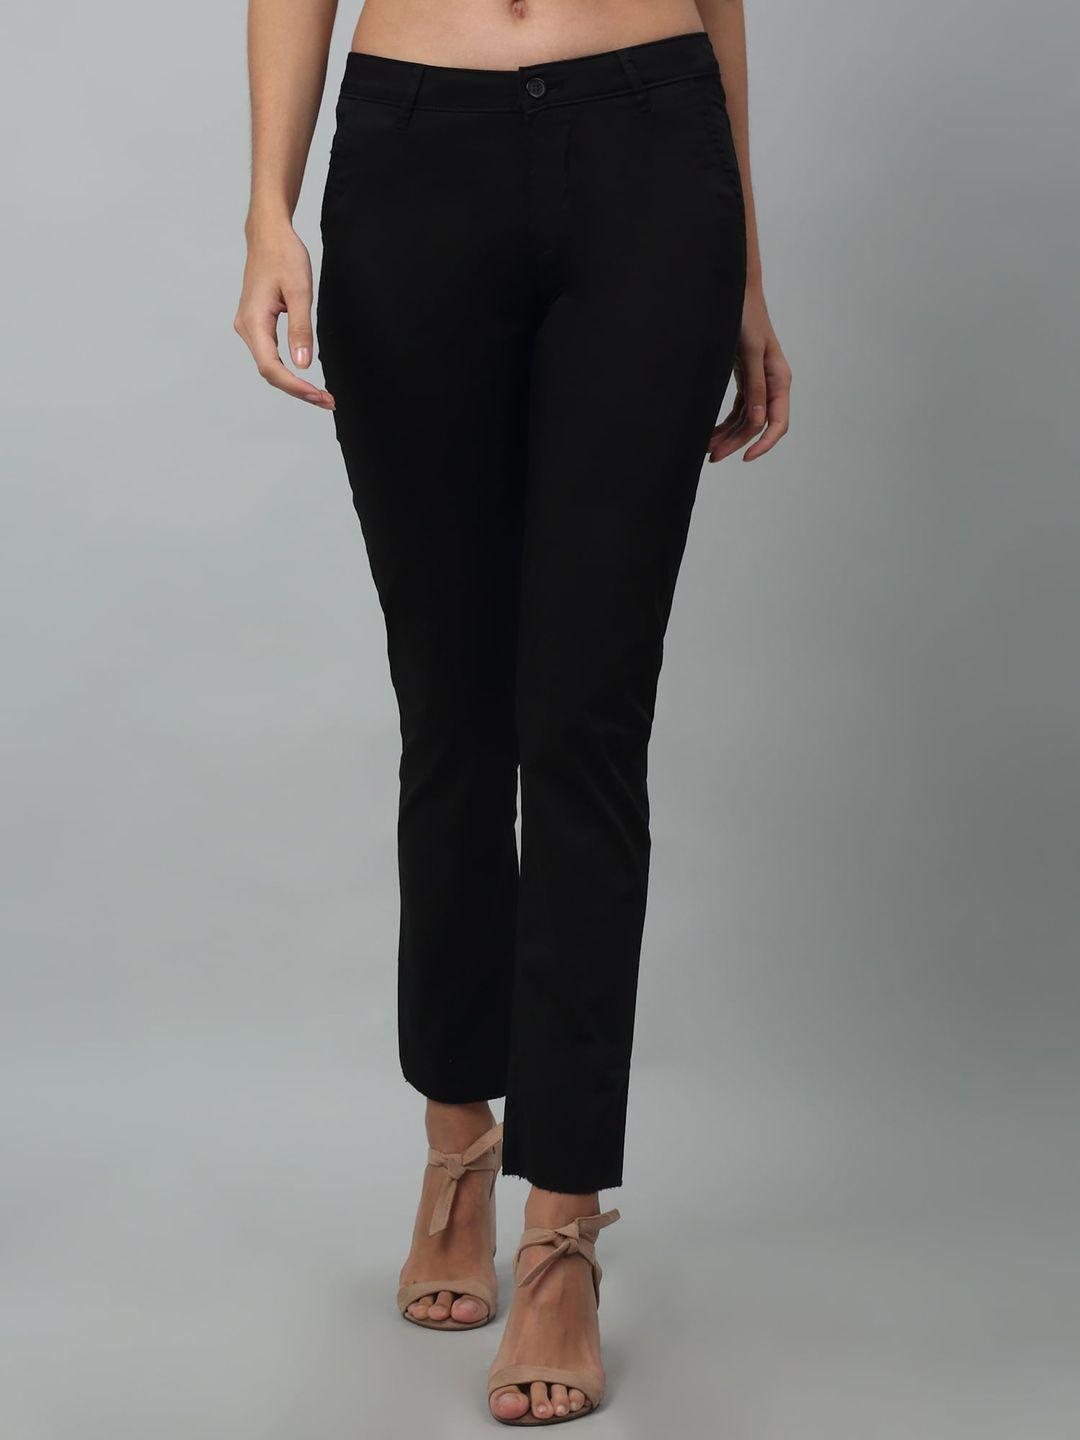 crozo-by-cantabil-women-mid-rise-trousers